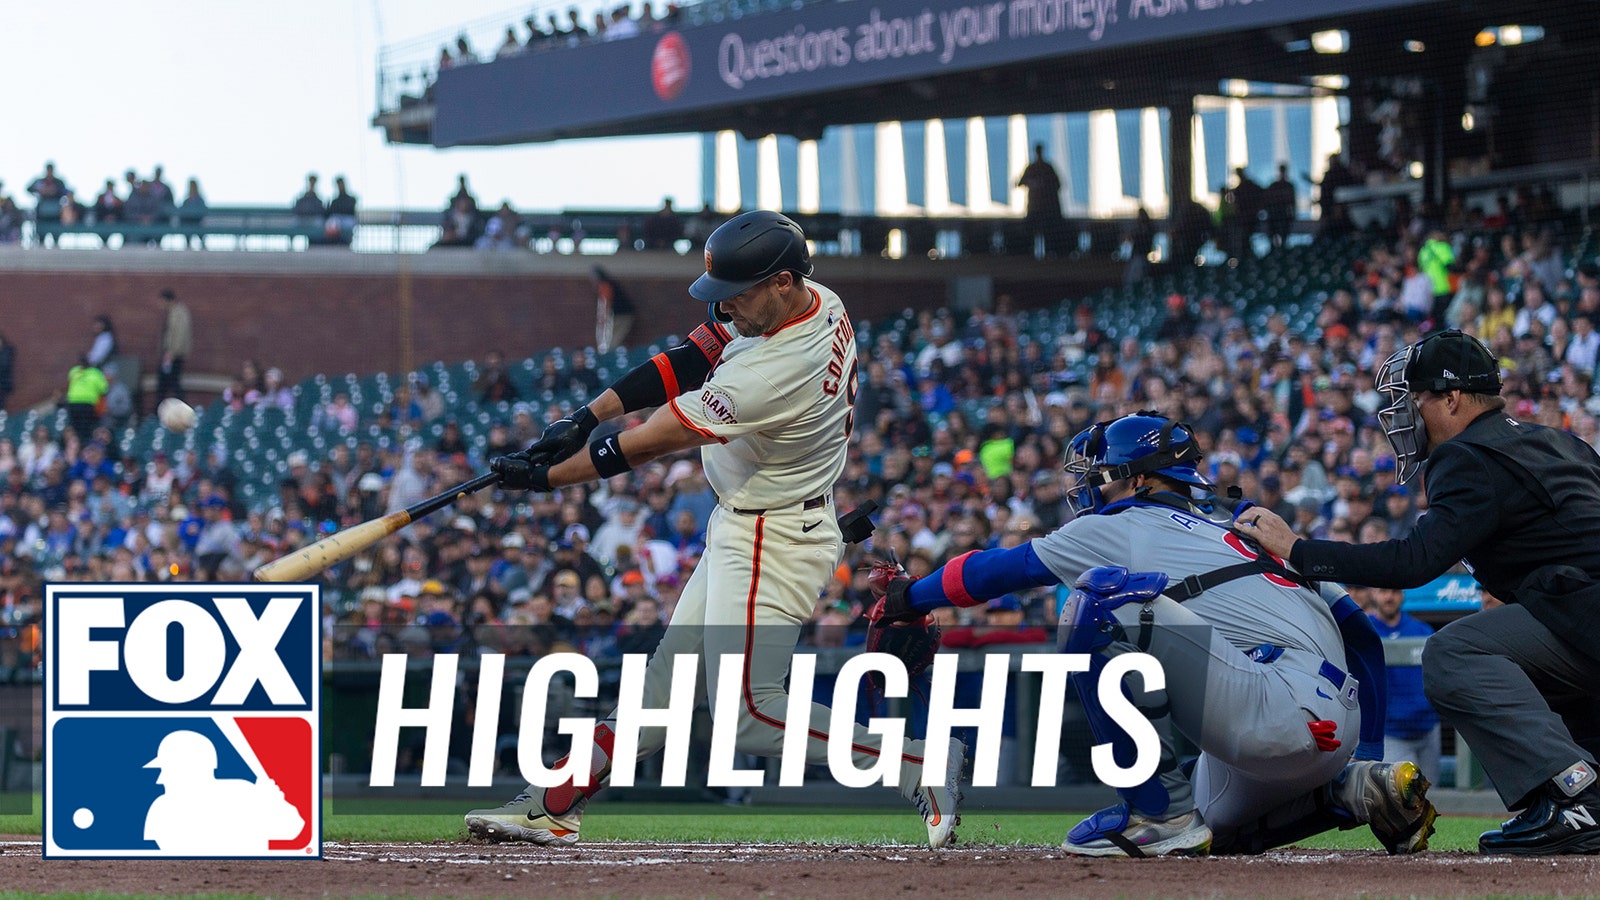 Highlights from Giants' 4-3 win vs. Cubs